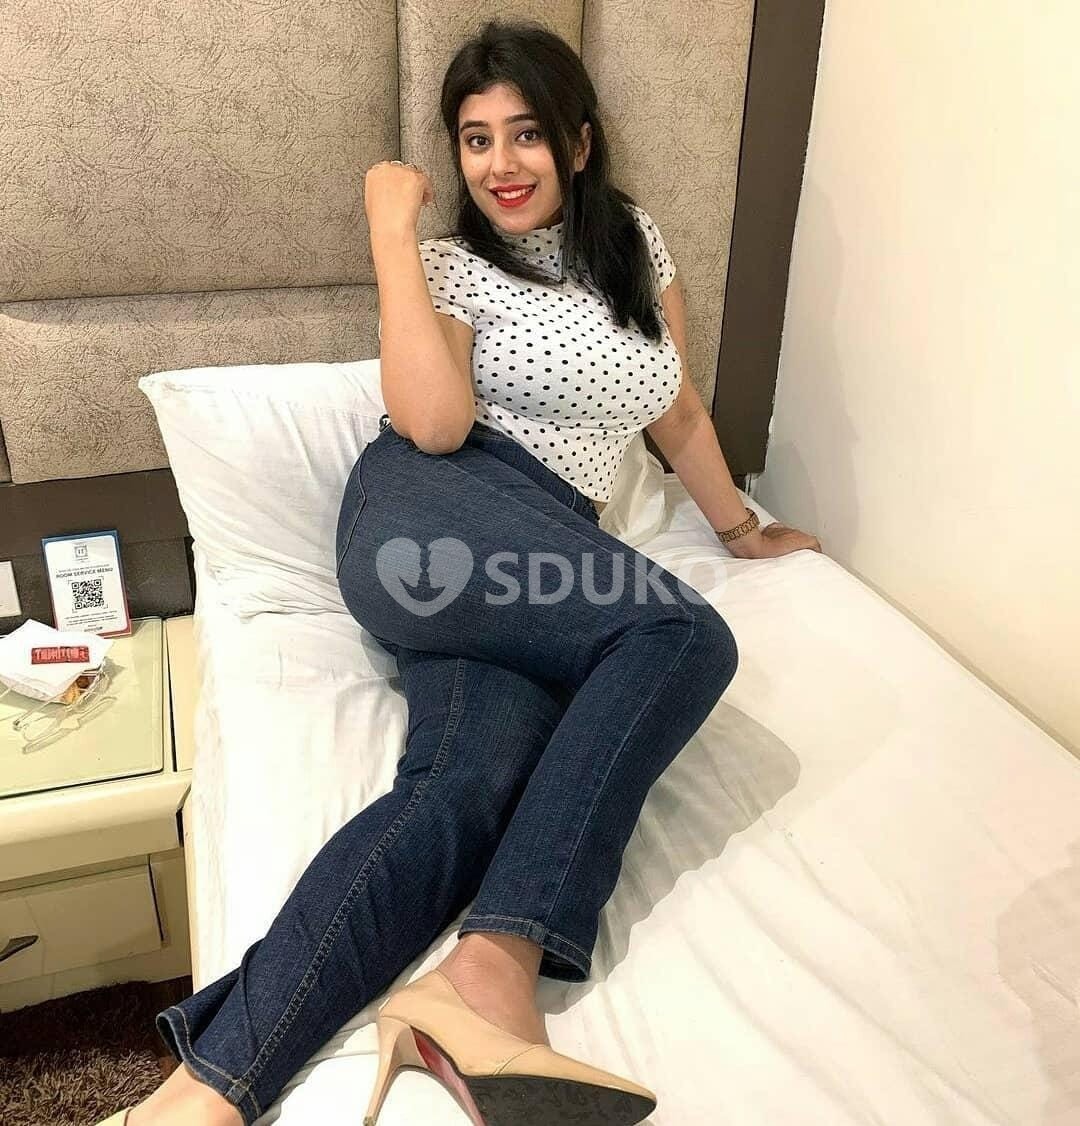 Ghaziabad best 🧚‍♂🚾🧚‍♂100% SAFE AND SECURE TODAY LOW PRICE UNLIMITED ENJOY HOT COLLEGE GIRL HOUSEWIFE A